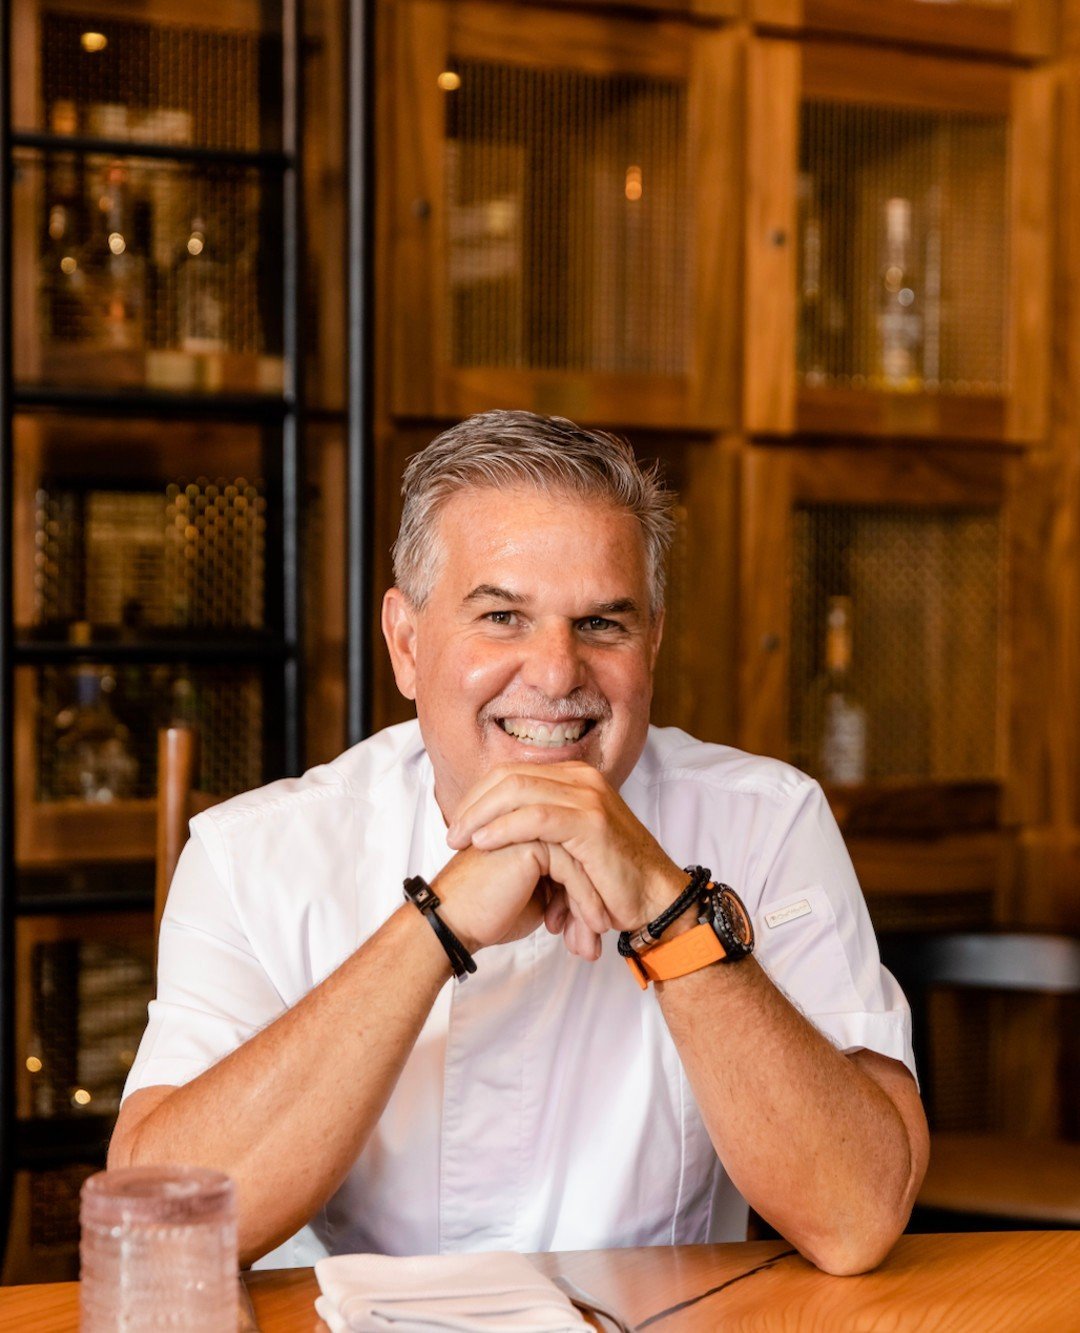 Get to know the chef! We asked @chefrichardsandoval about a few of his favorite things . . . 

Favorite dish at Lona?
 - I love the steak Tampique&ntilde;a! 

What's one dish/meal that has a special memory for you?
 - One of the most vivid memories I